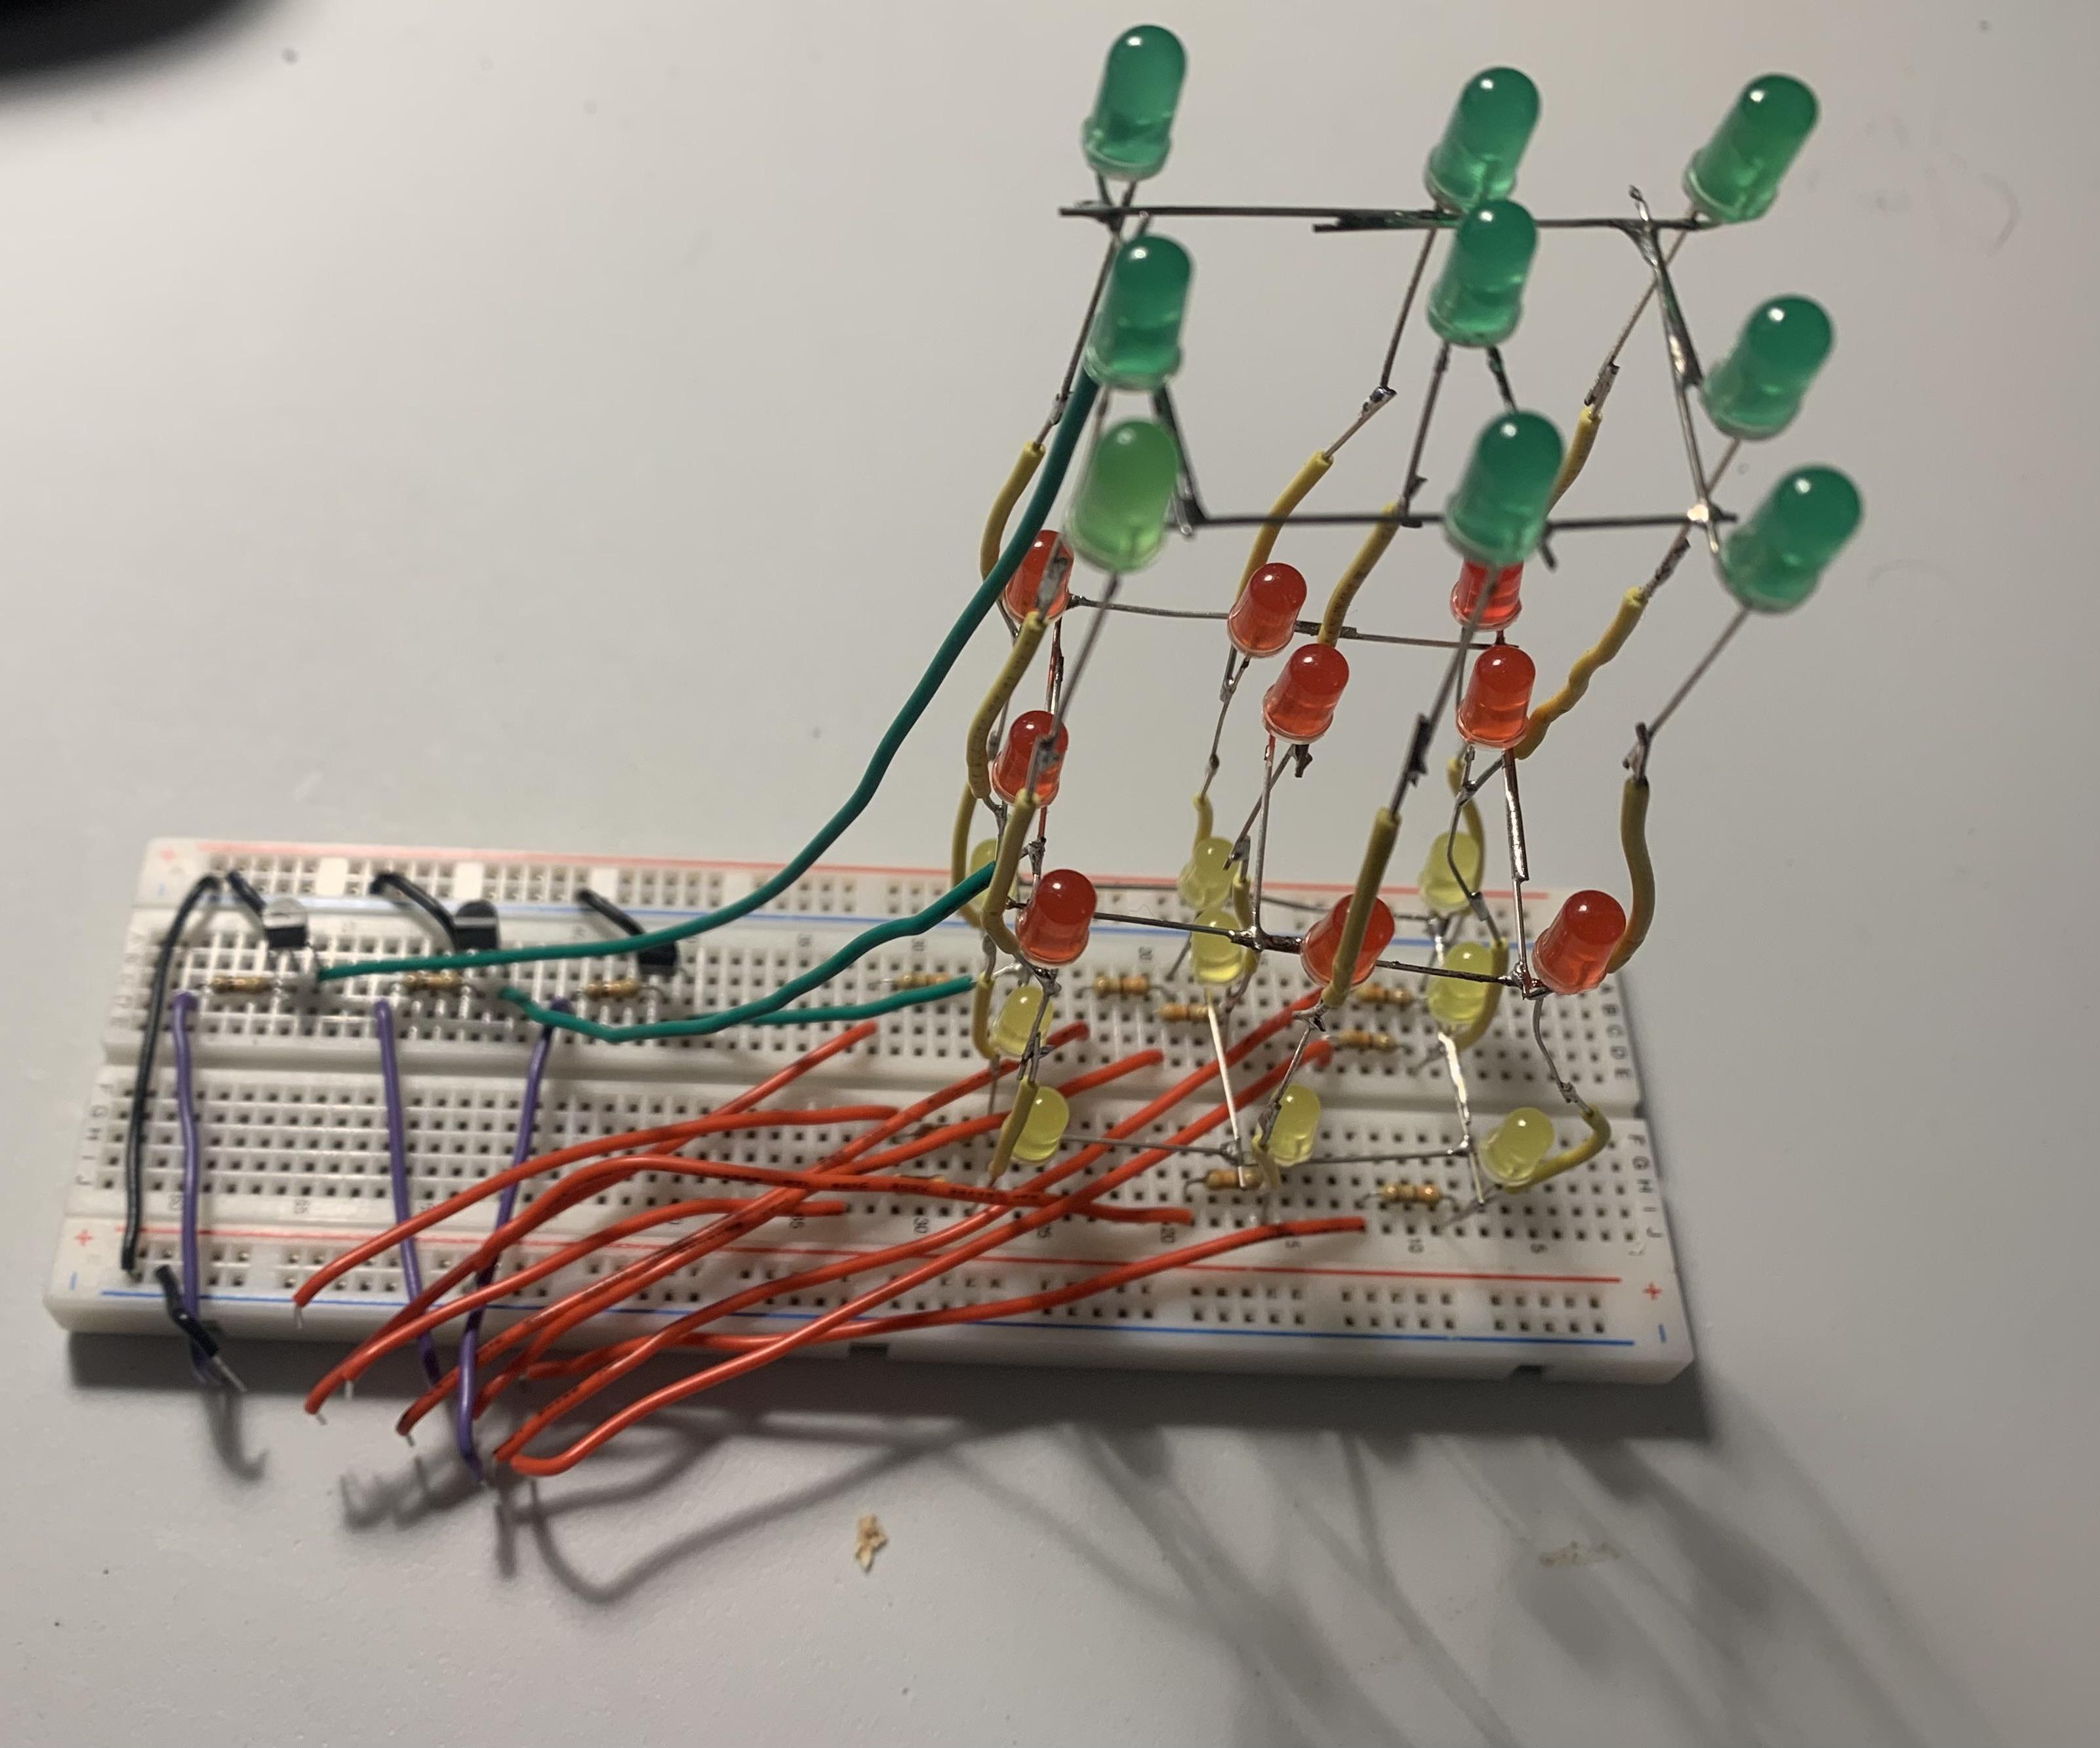 LED Tower With Arduino